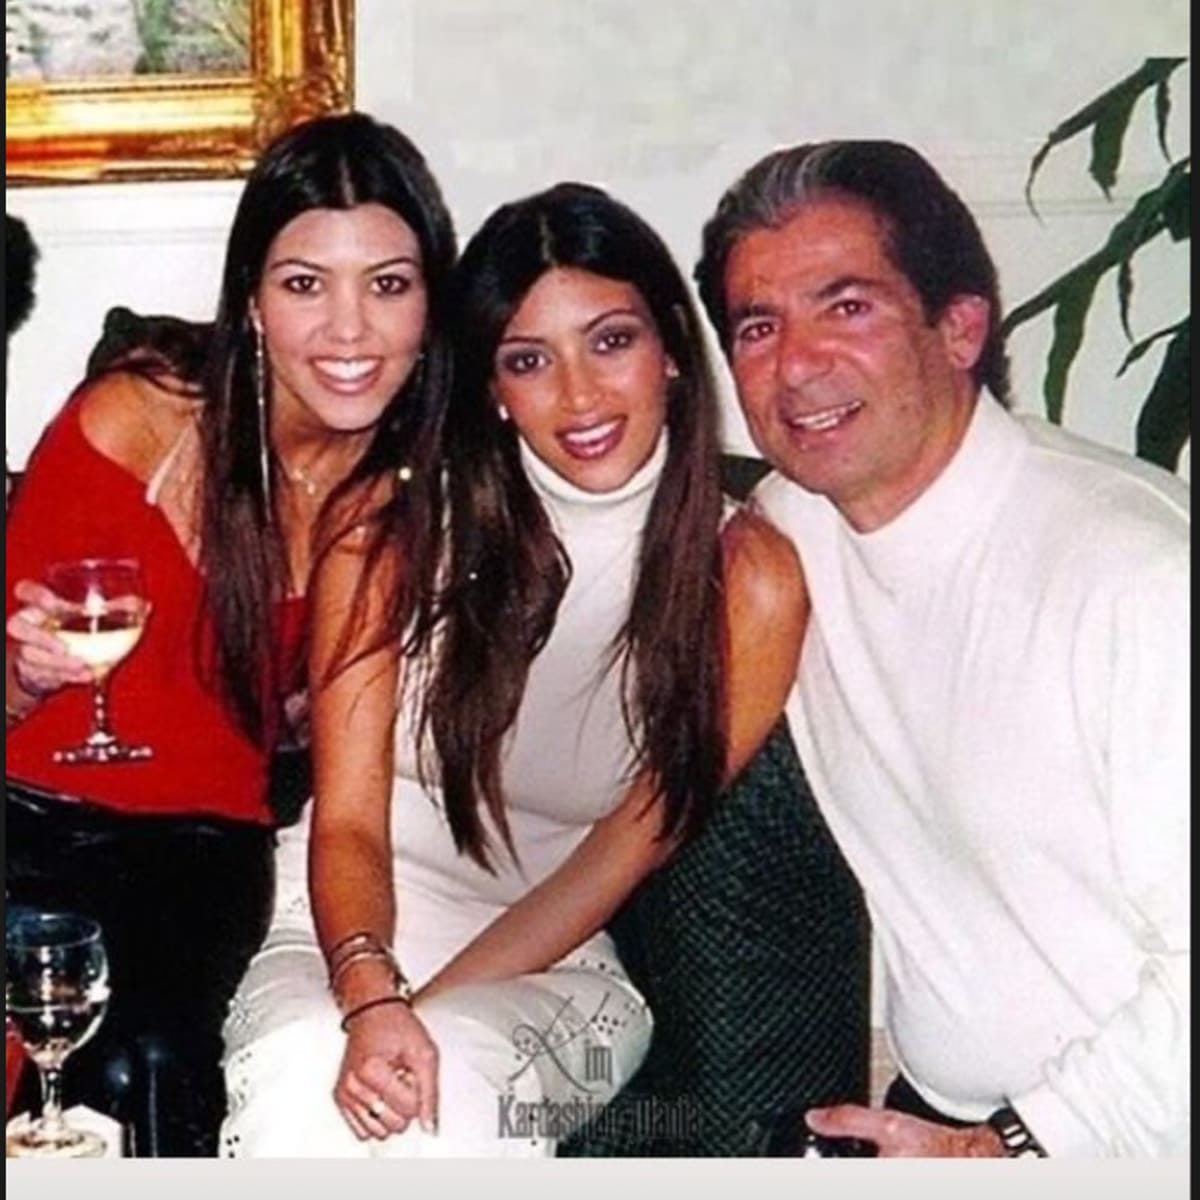 The Kardashian sisters honors their father